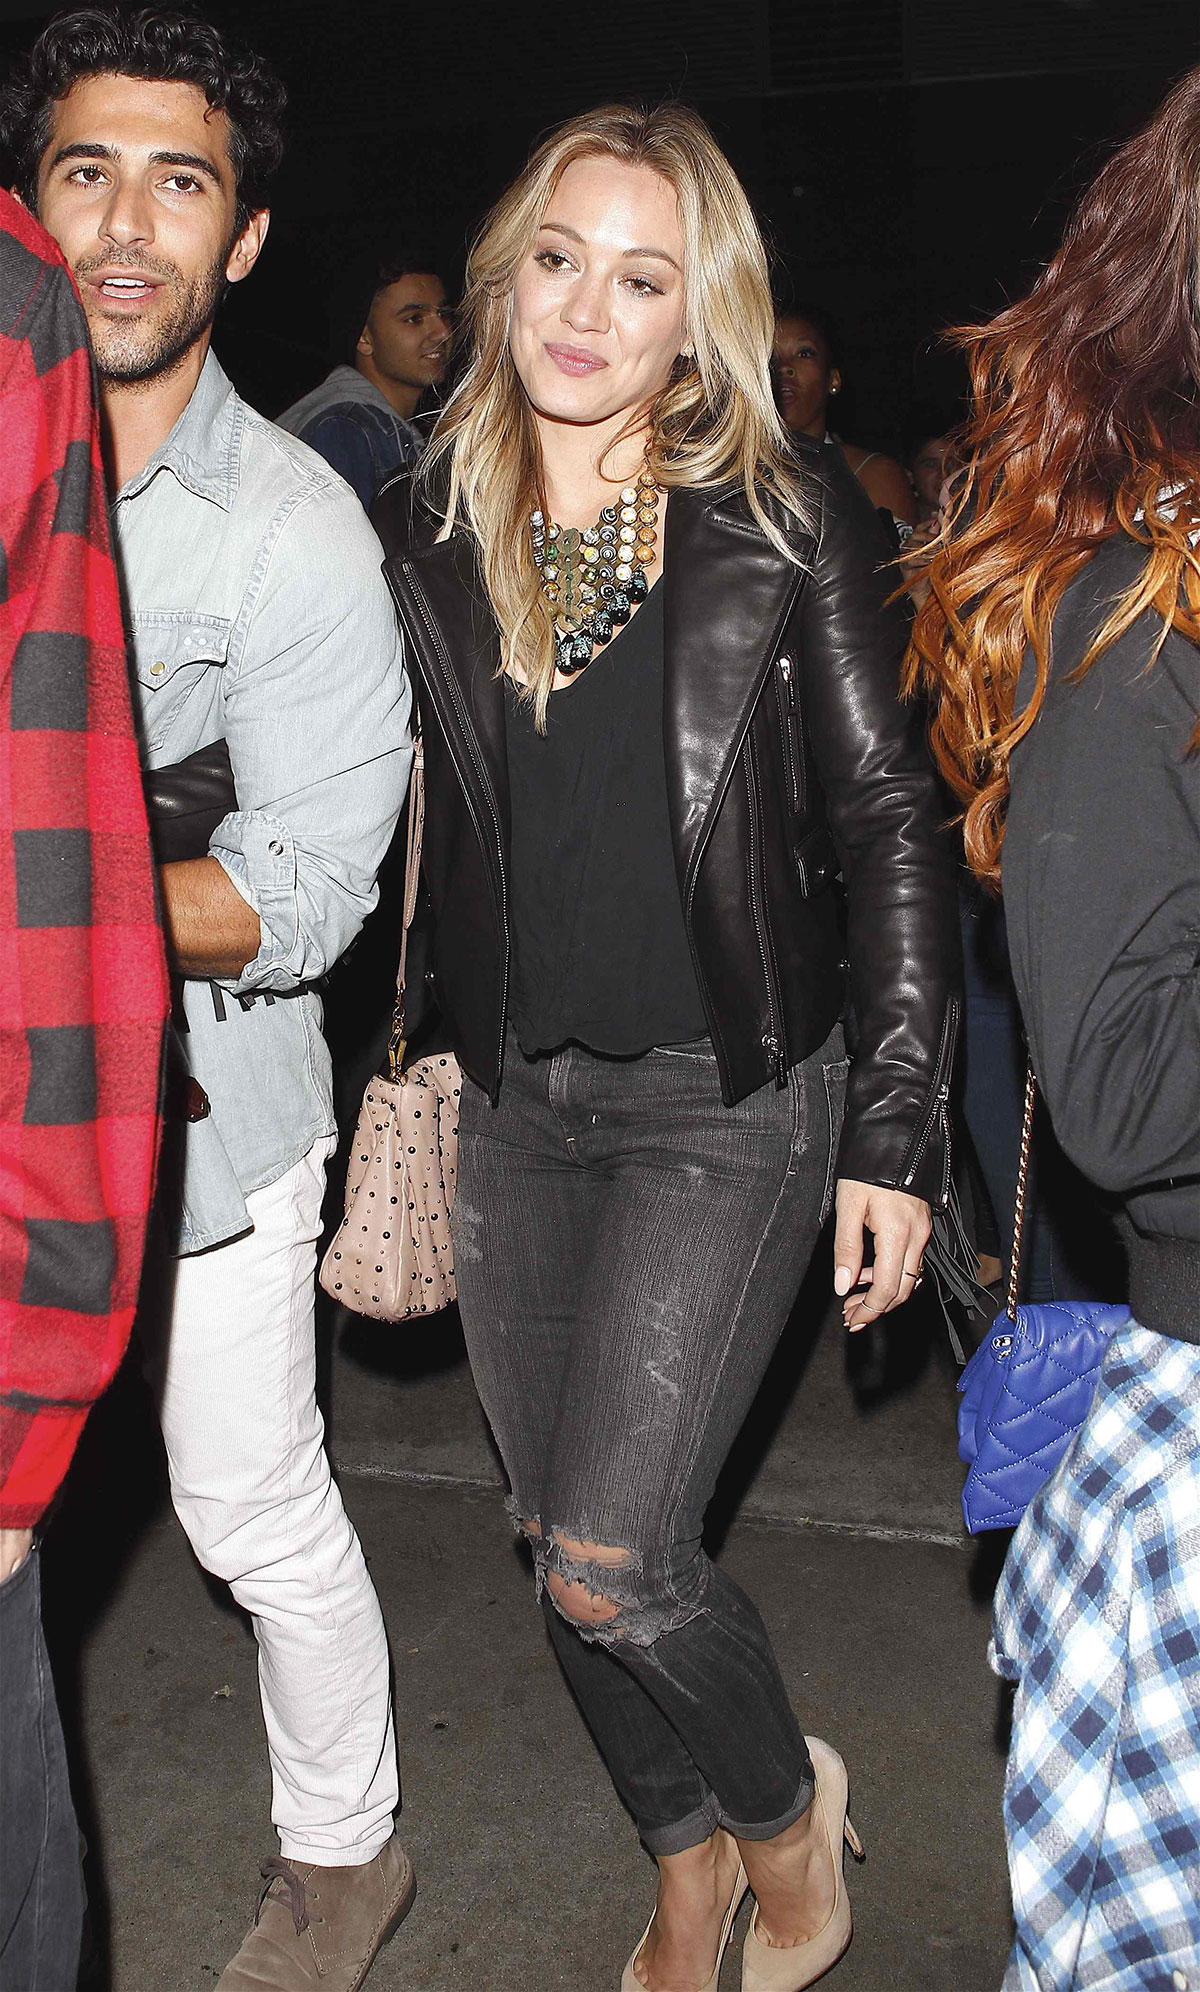 Hilary Duff at Staples Centre for a Miley Cyrus Concert